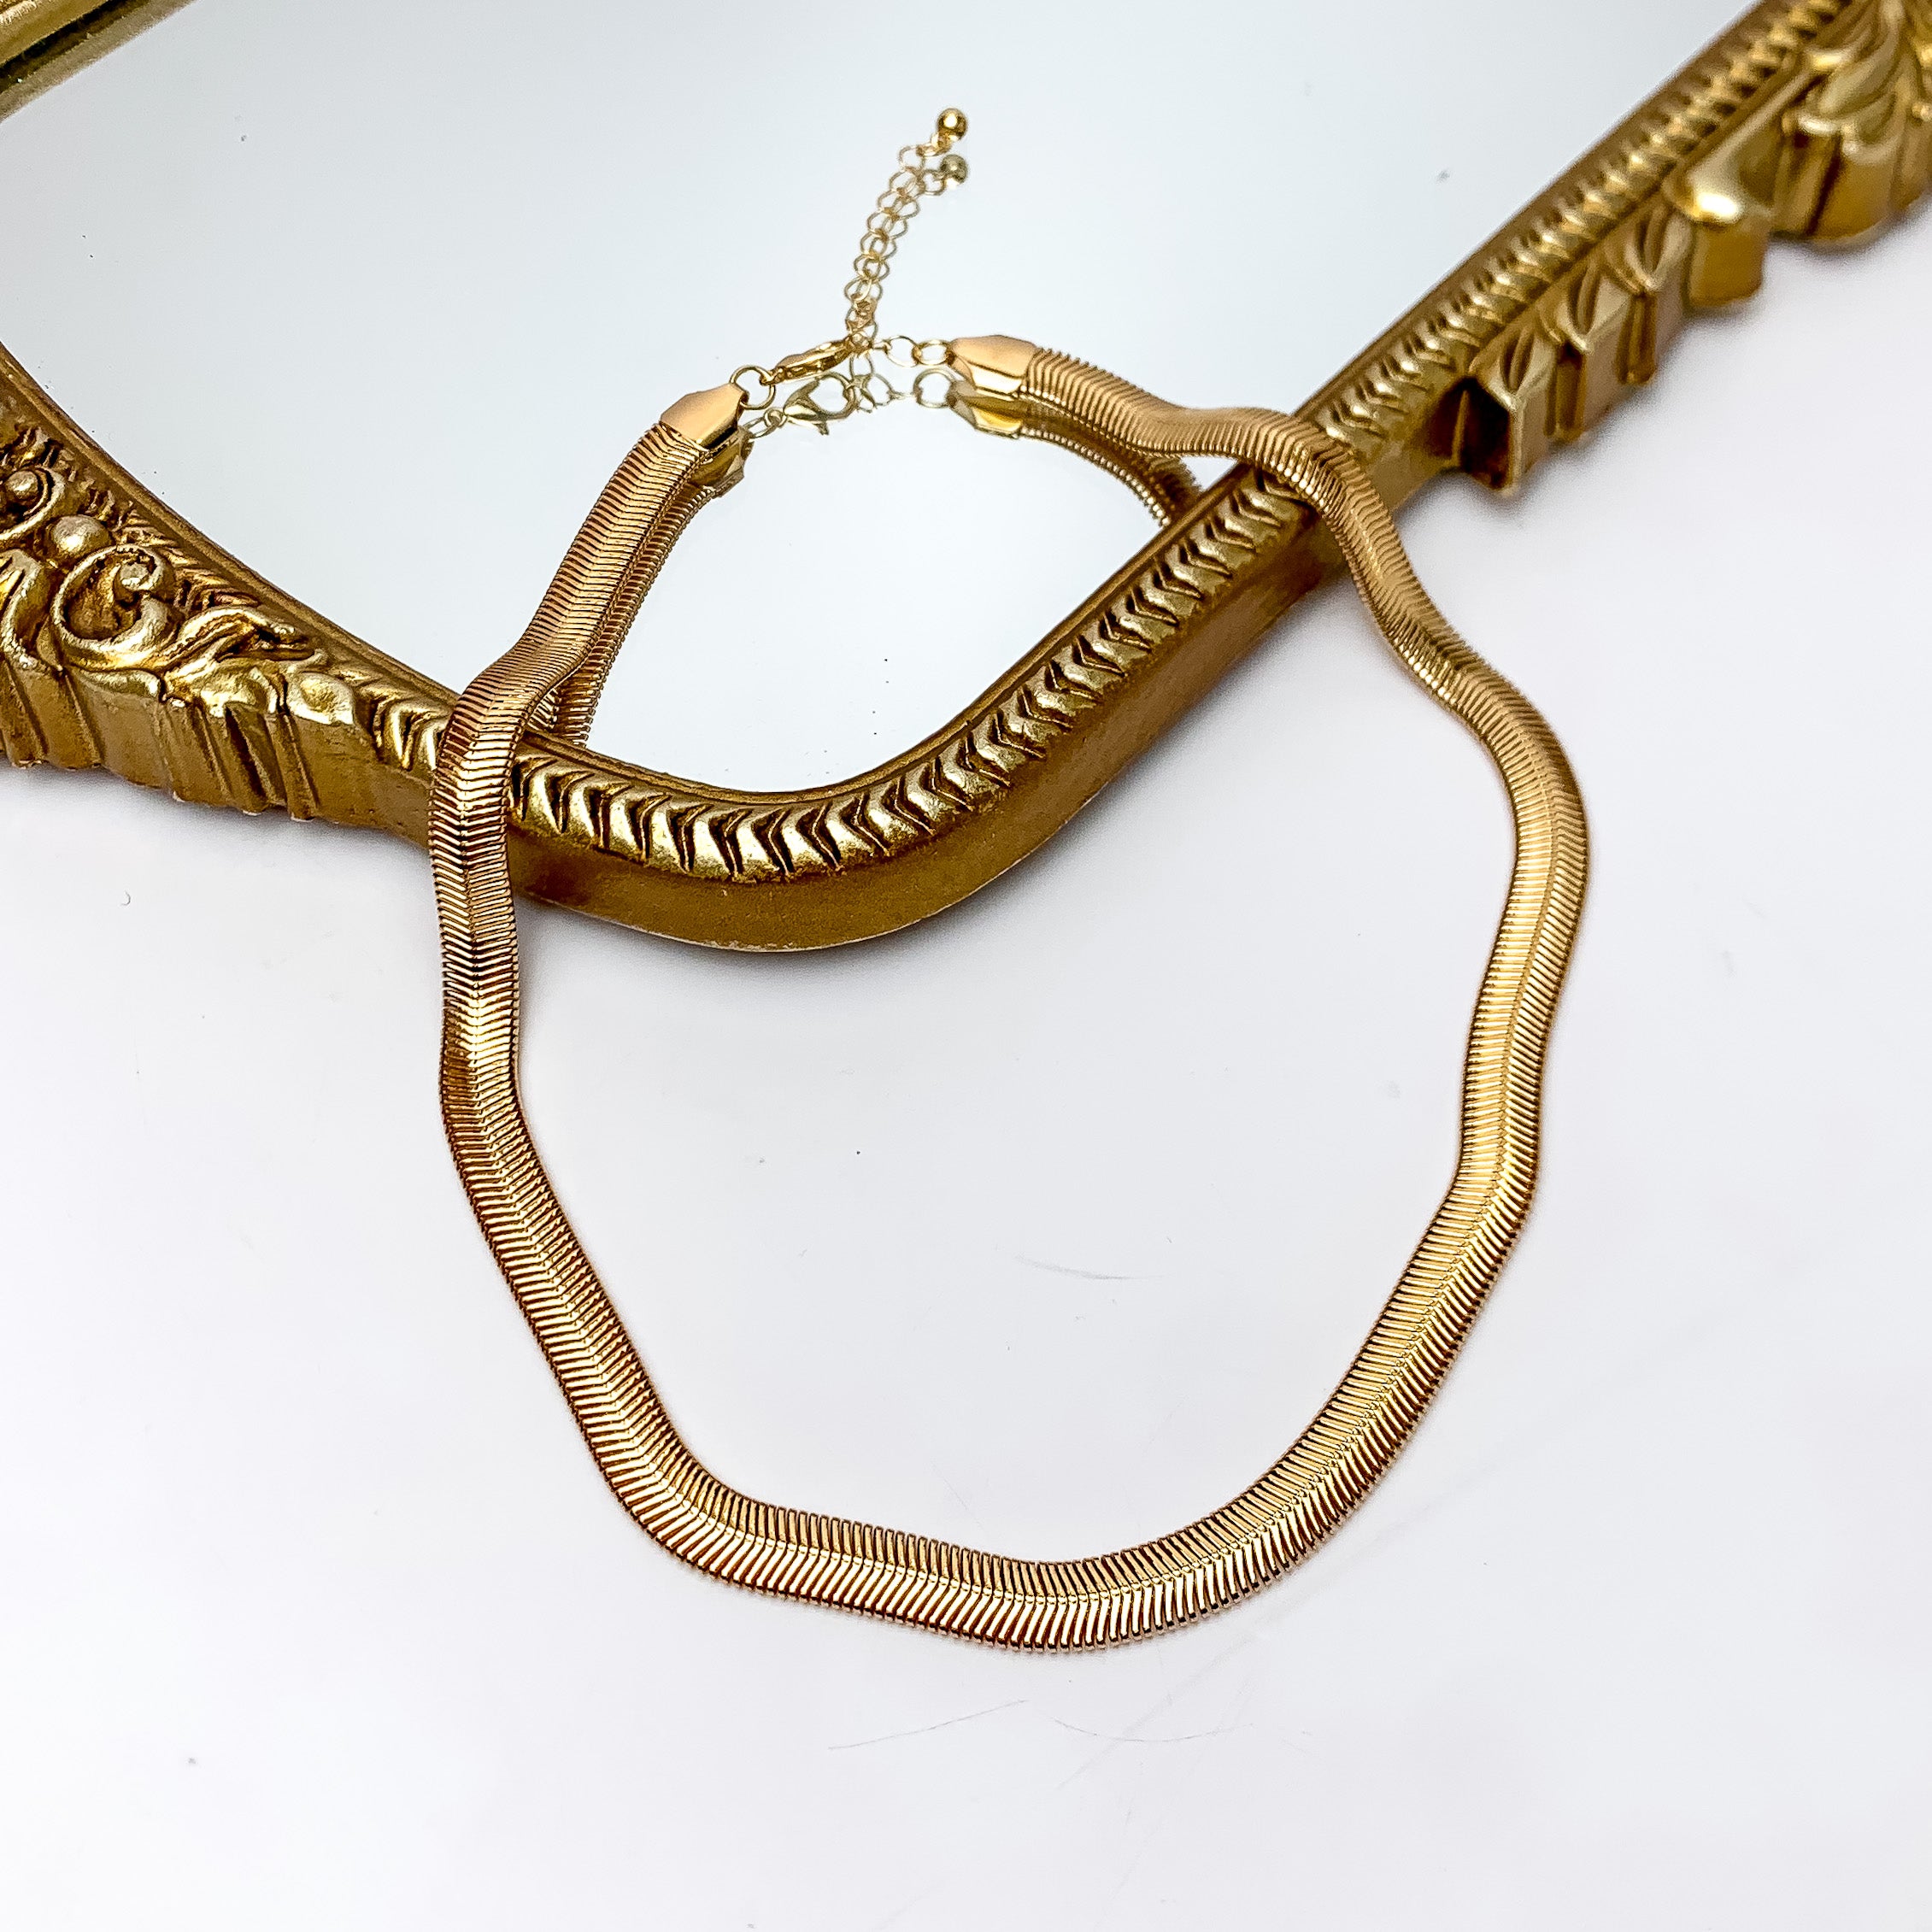 Daily Basis Gold Tone Chain Necklace. Pictured on a white background with part of the necklace on a mirror with a gold frame.